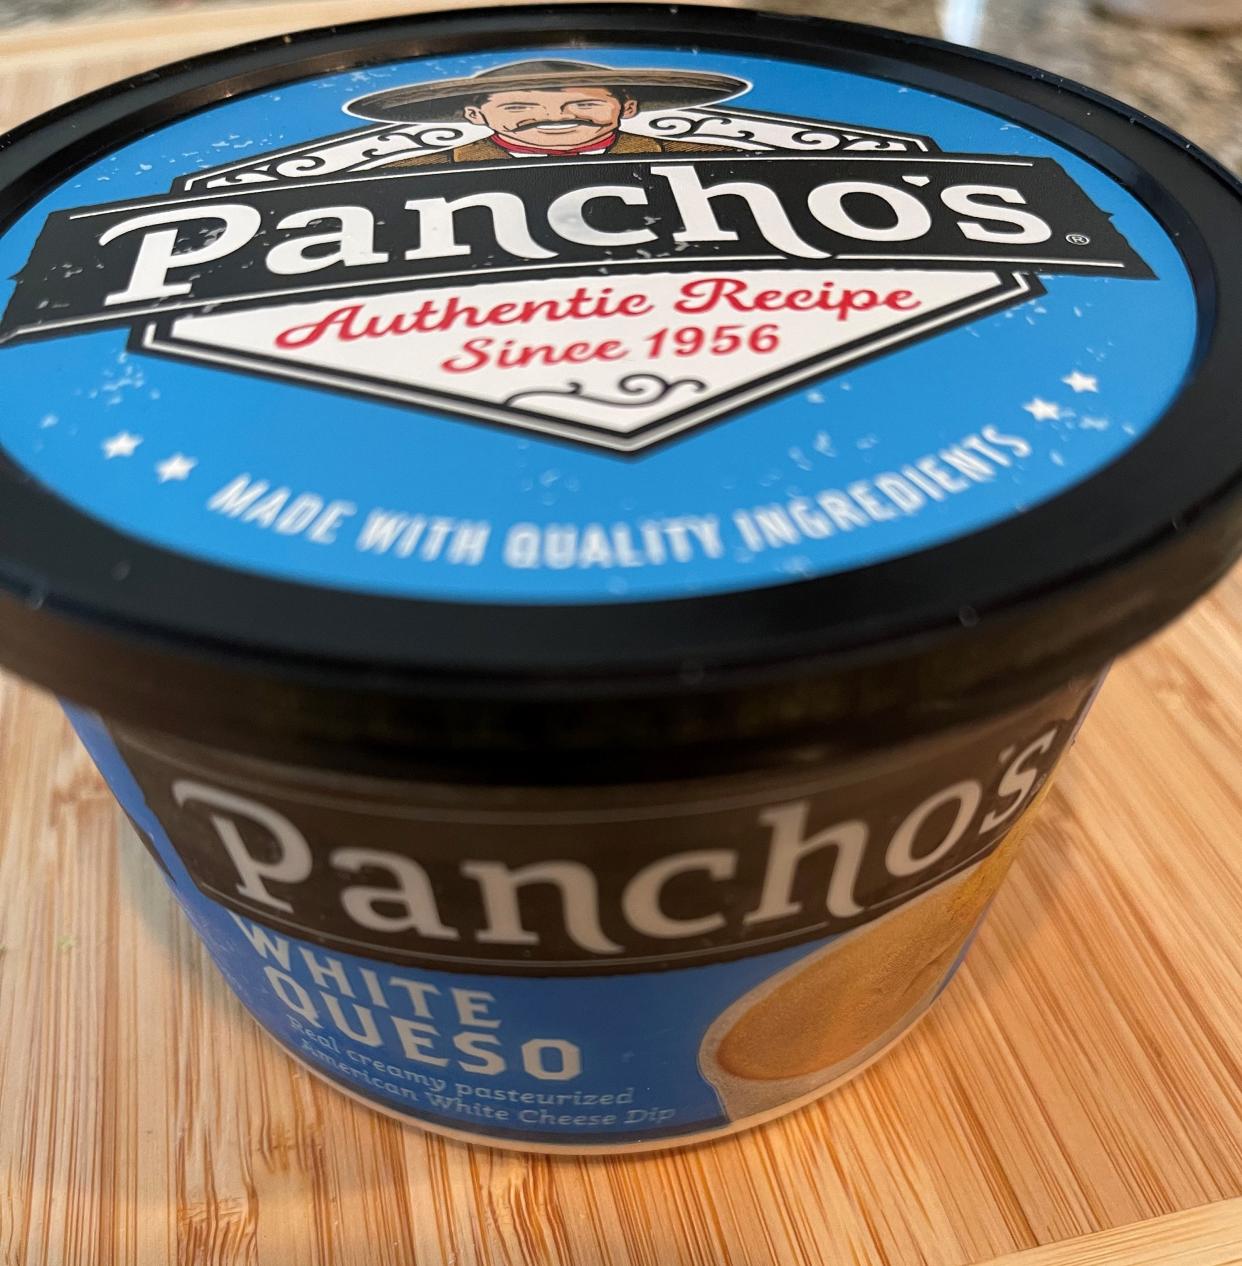 Sabrosura Foods, LLC has acquired the Pancho's Mexican Foods Inc. brand. The brand includes Pancho's Original Queso Dip, Chipotle Queso Dip and White Queso Dip.